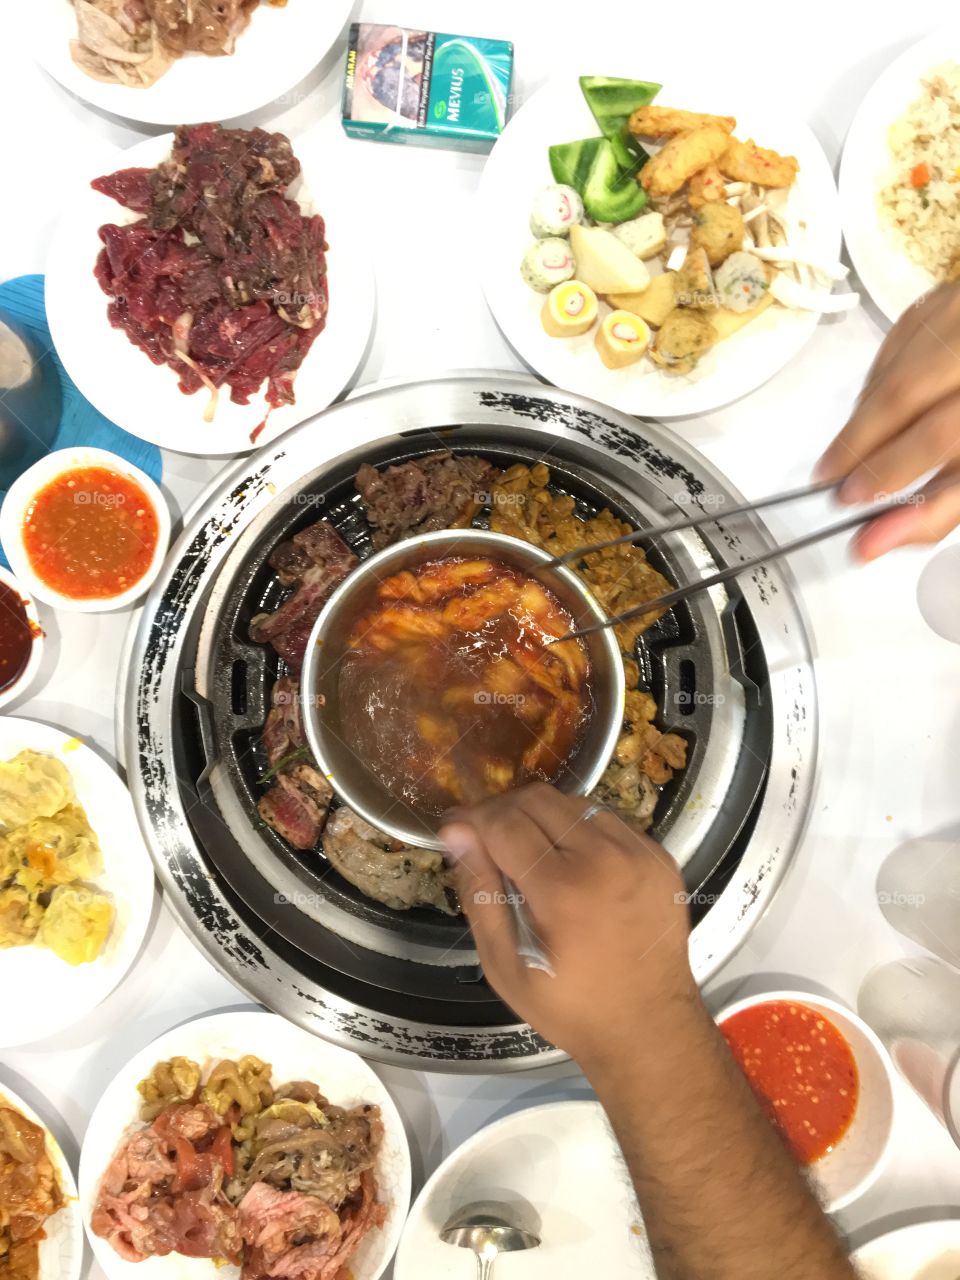 Steamboat Day 